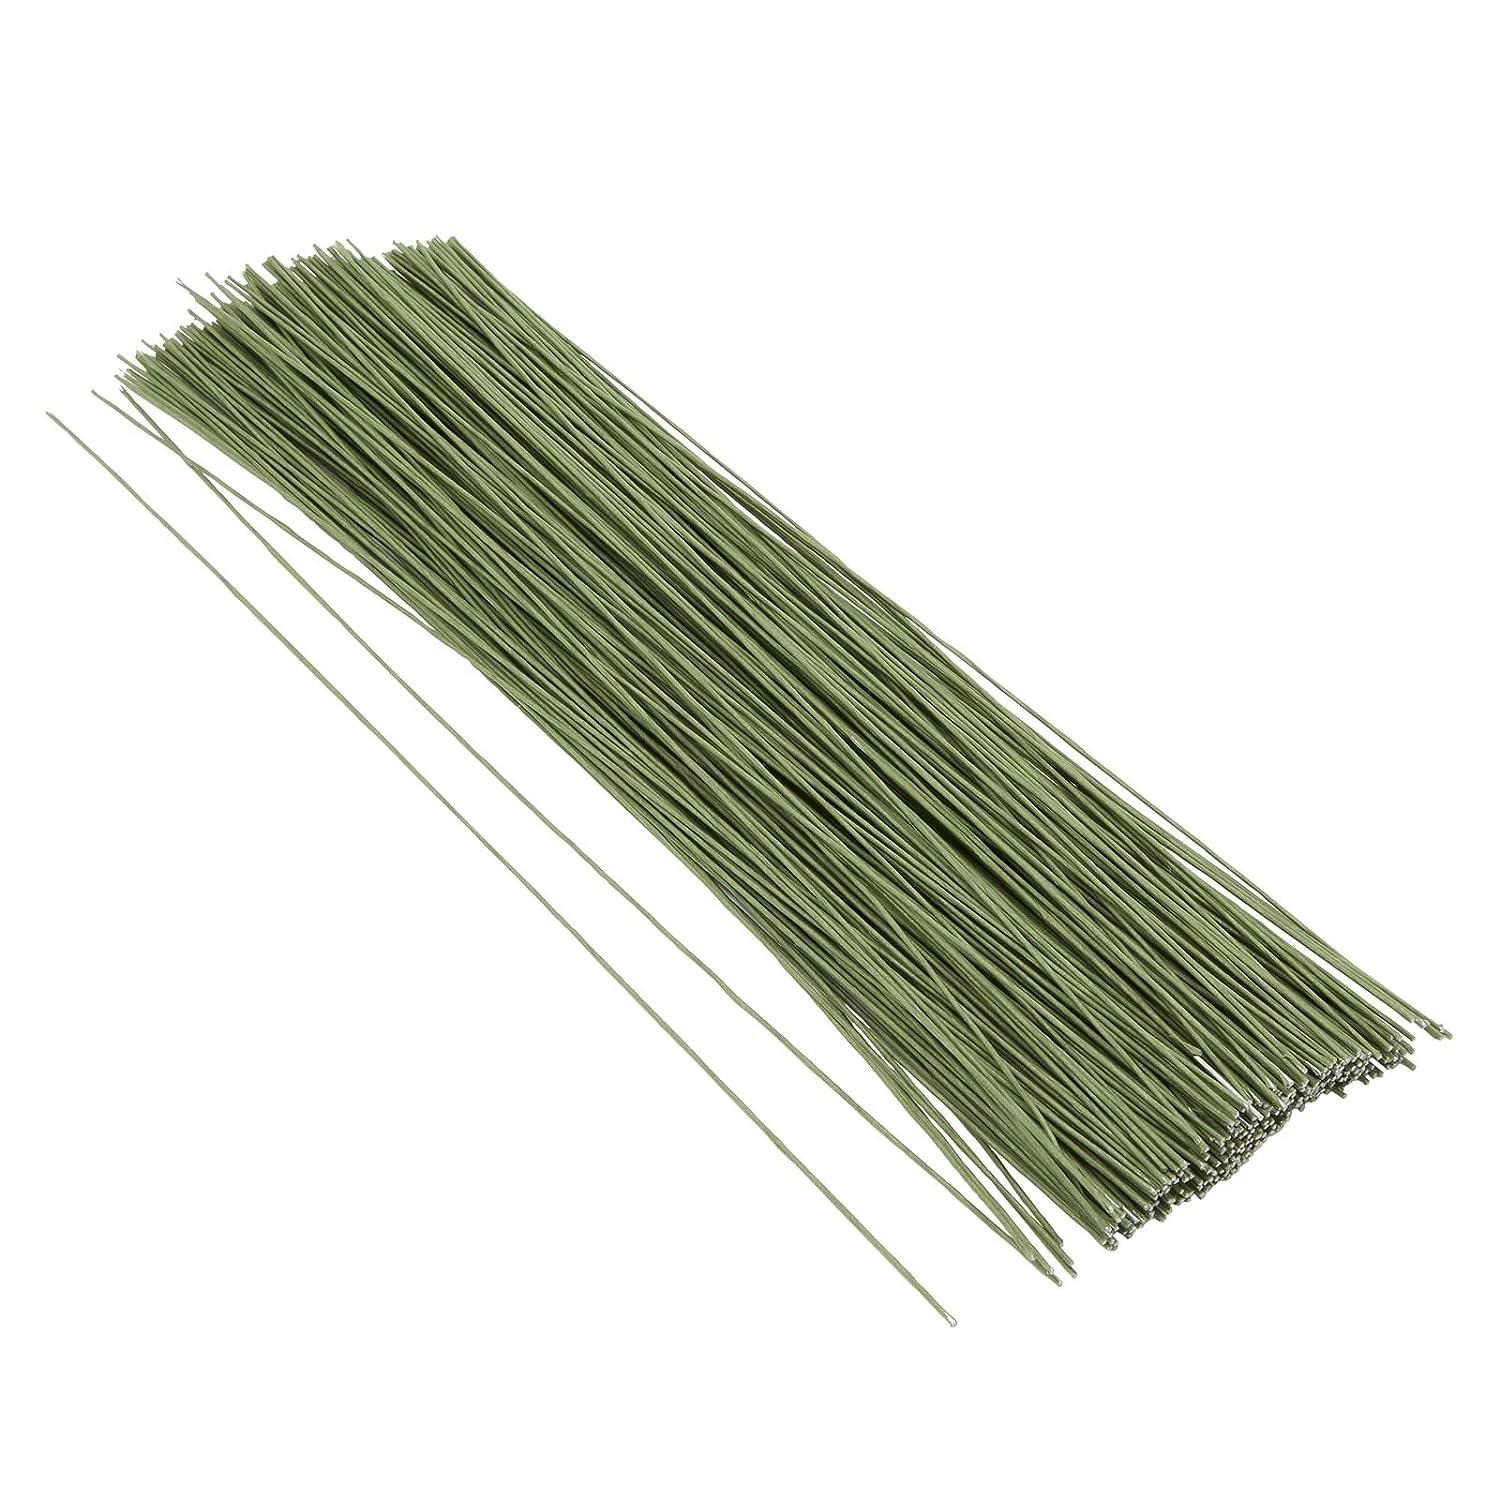  Juvale 300 Pieces Green 18 Gauge Floral Wire Stems for DIY  Crafts, Artificial Flower Arrangements (16 in) : Arts, Crafts & Sewing